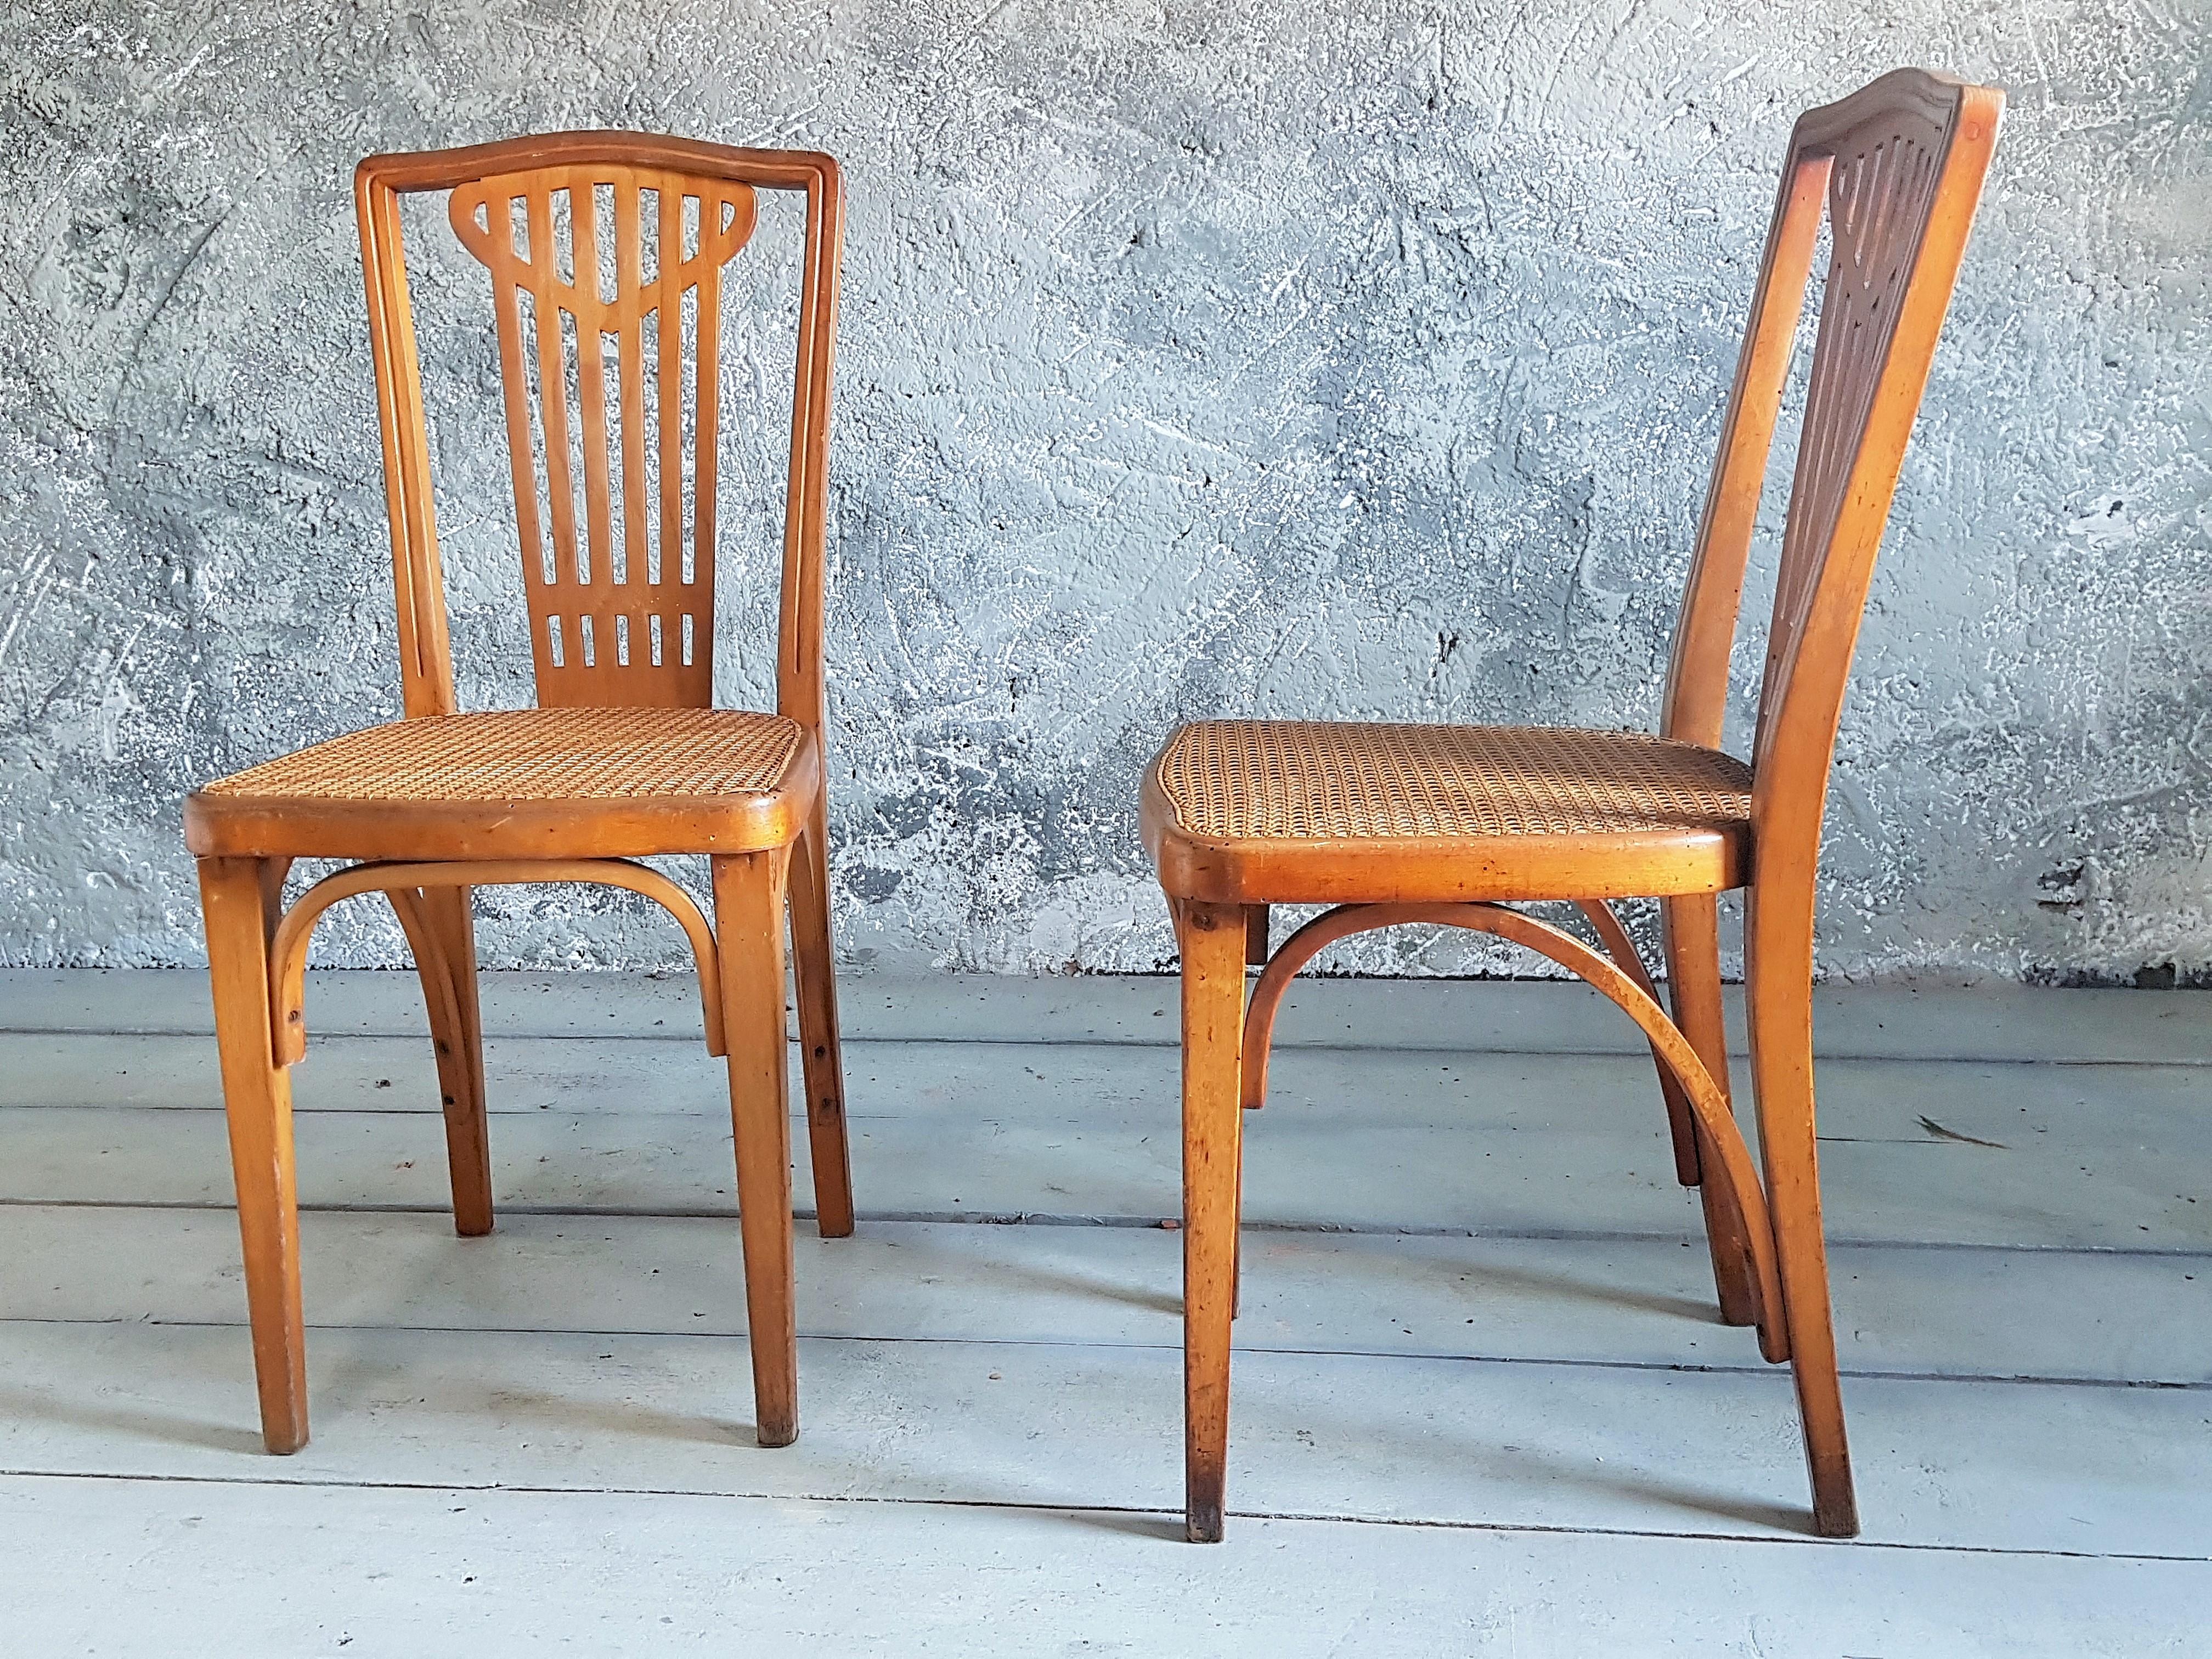 Spanish Arts and Craft Art Nouveau Set of 8 Bentwood Chairs Signed Thonet, 1900 For Sale